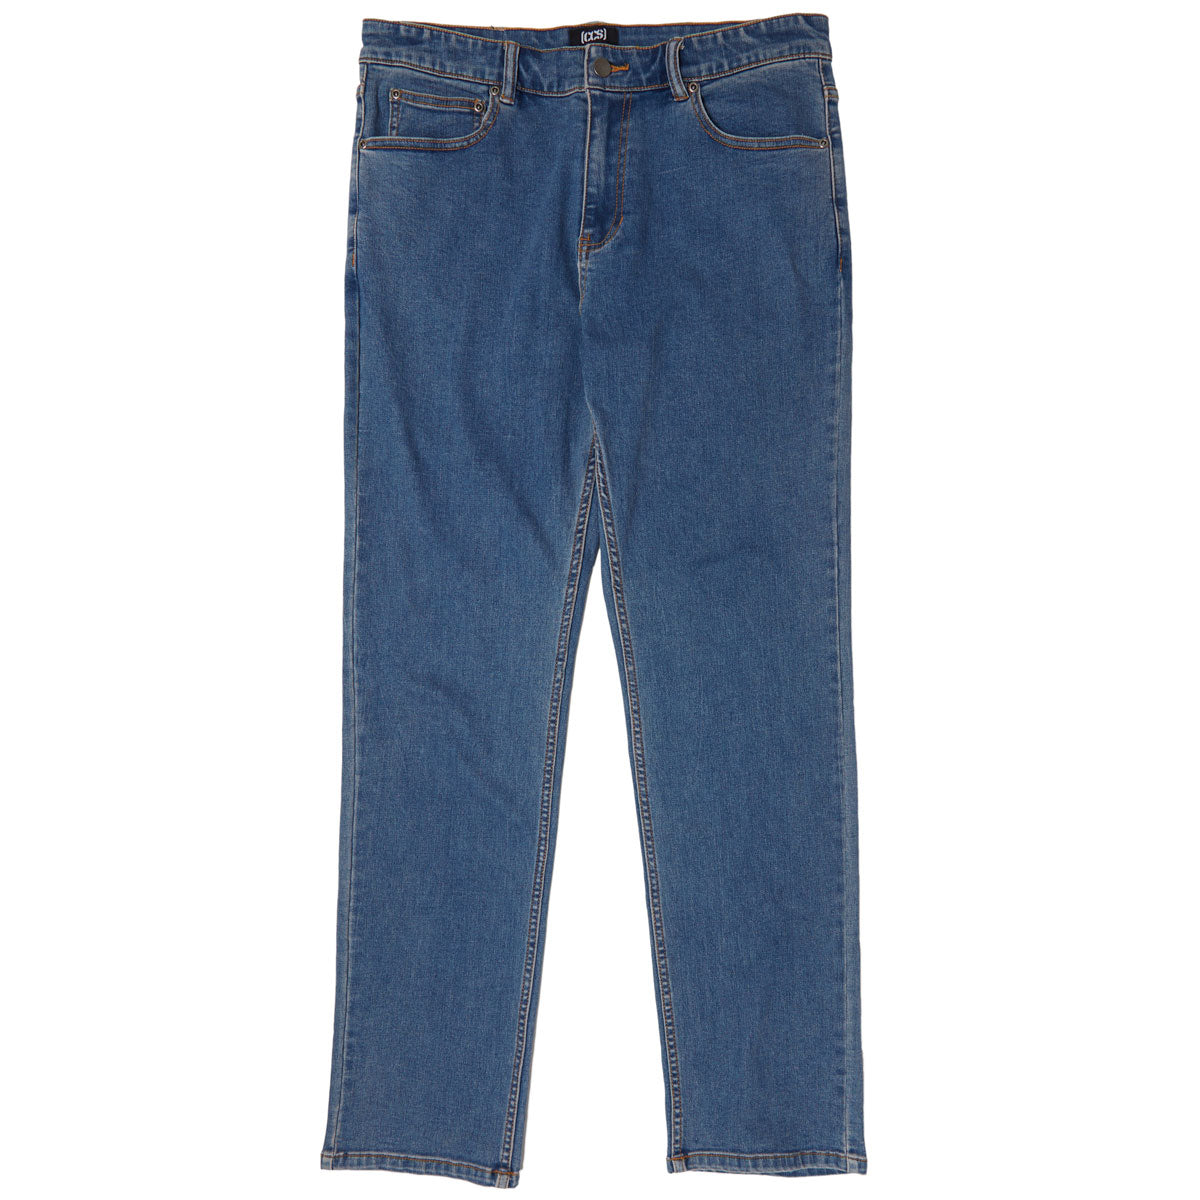 CCS Standard Plus Relaxed Denim Jeans - New Rinse